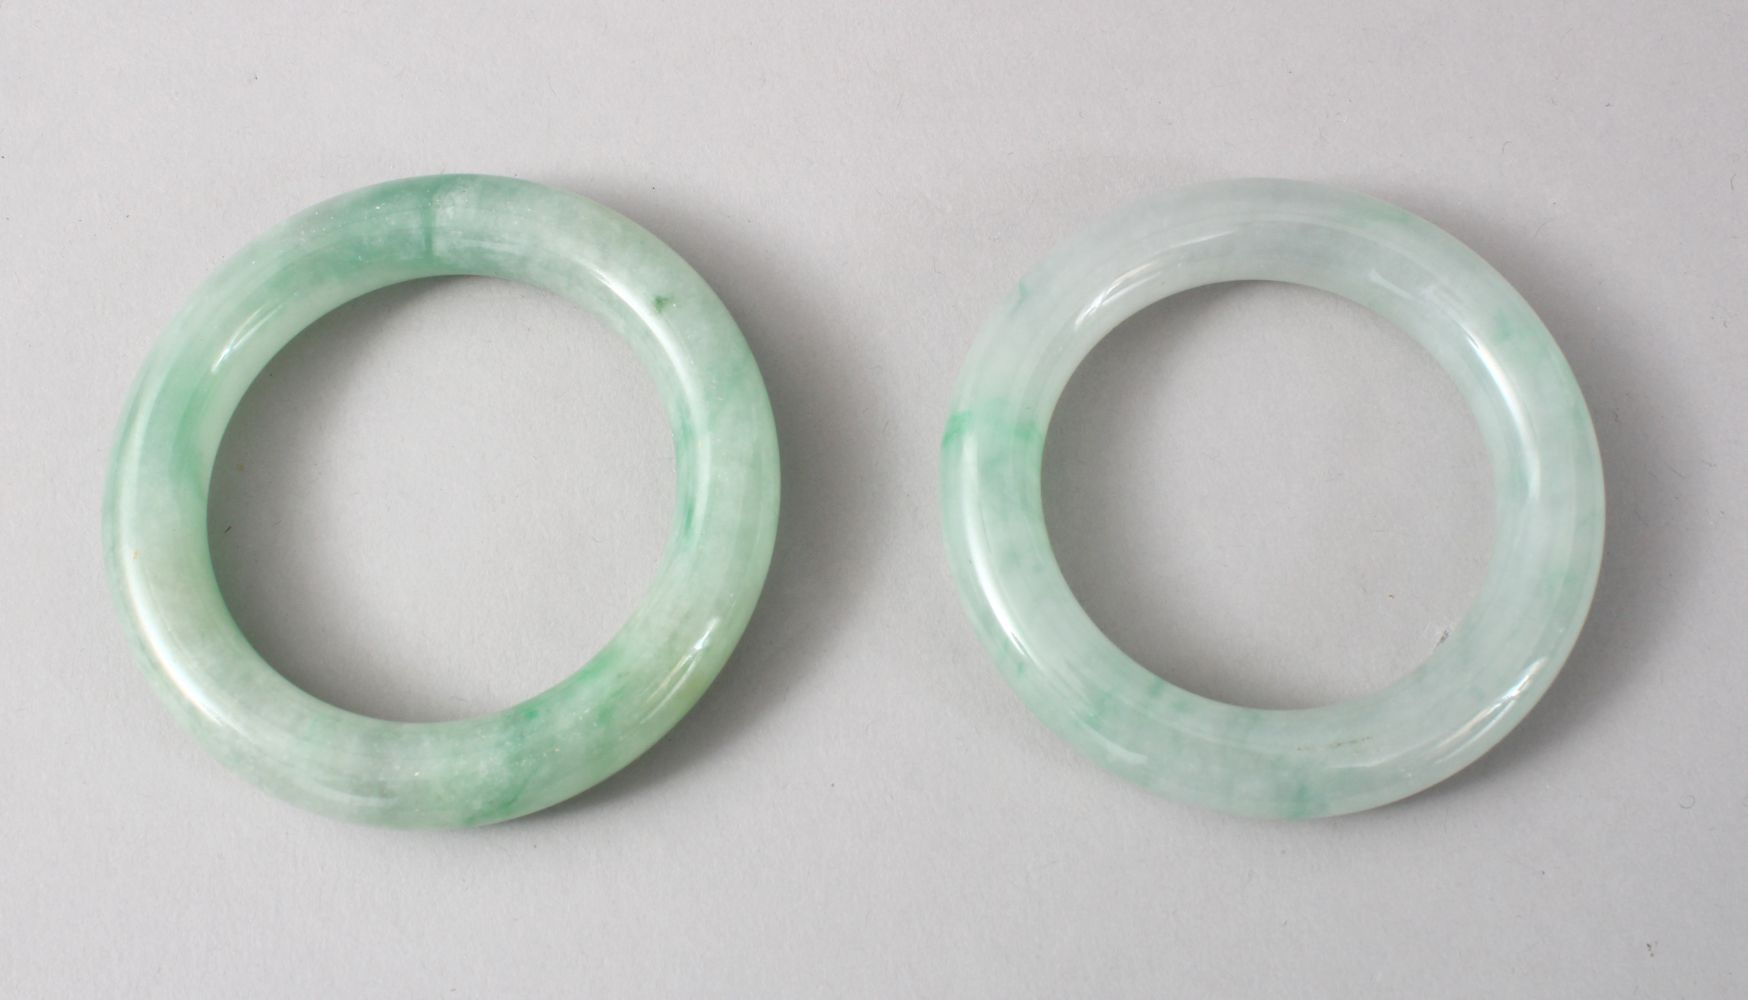 TWO GOOD CHINESE CARVED JADE BANGLES, 8cm diameter with an internal measurement of 5cm. - Image 2 of 5